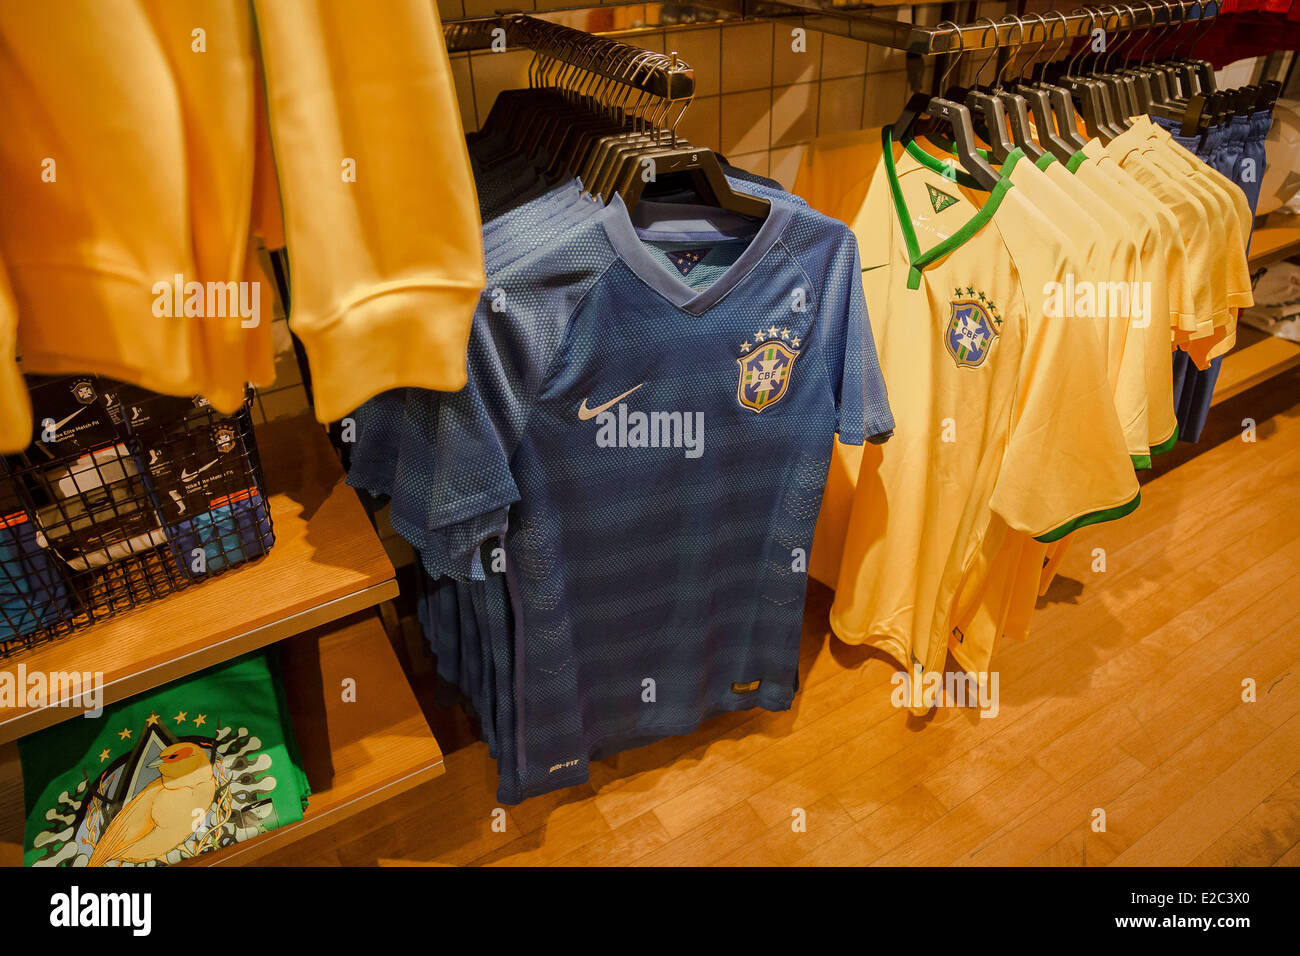 New York, NY, US. 18th June, 2014. At the Nike flagship store in midtown  Manhattan the World Cup in Brazil is good for buisiness. Soccer tops and  anything to do with the